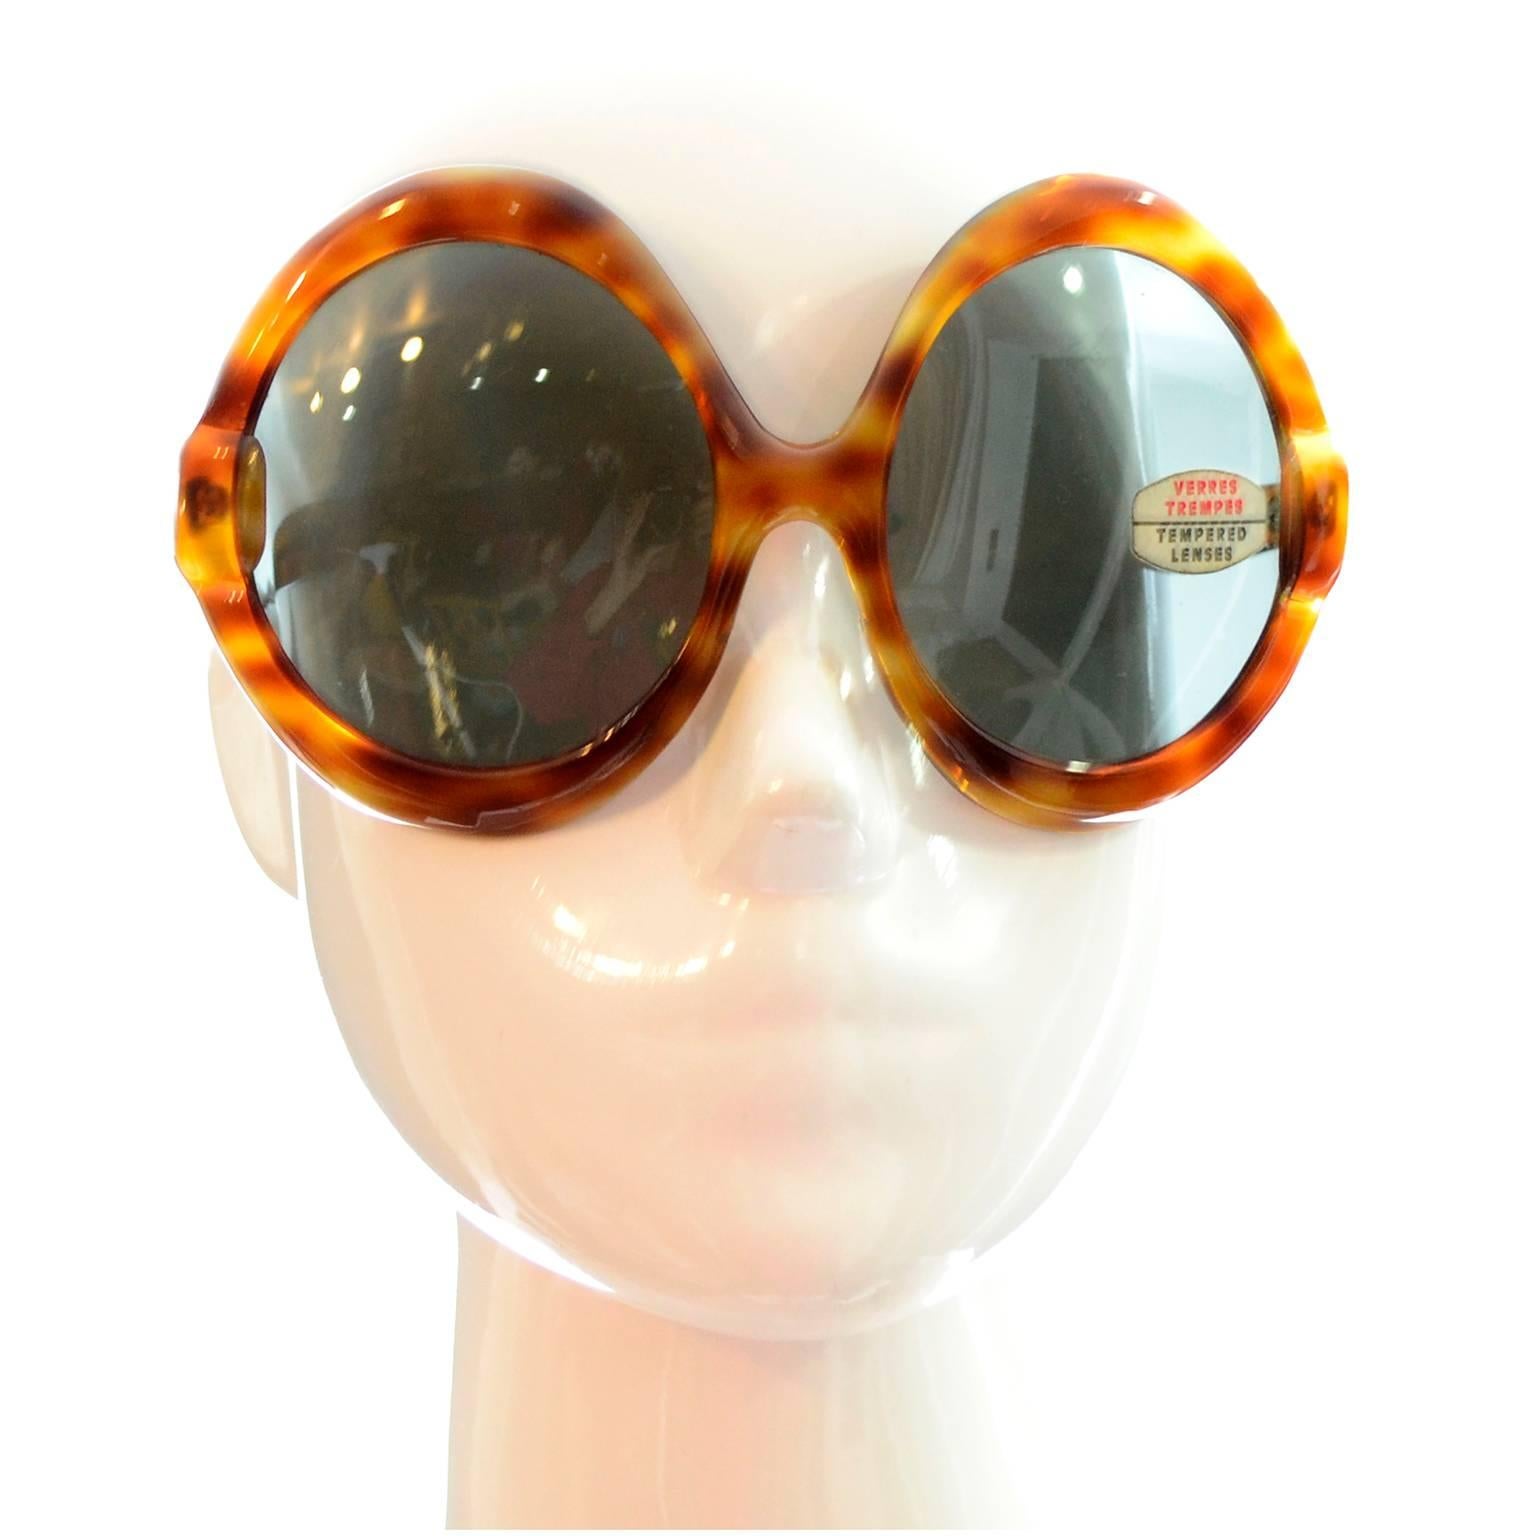 This is a pair of new but vintage Bug Eye dead stock sunglasses in tortoise pattern that were made in France in the 1960's.  These iconic 60's glasses have tempered glass ( verres trempes ) and are in excellent condition.  You can wear them as